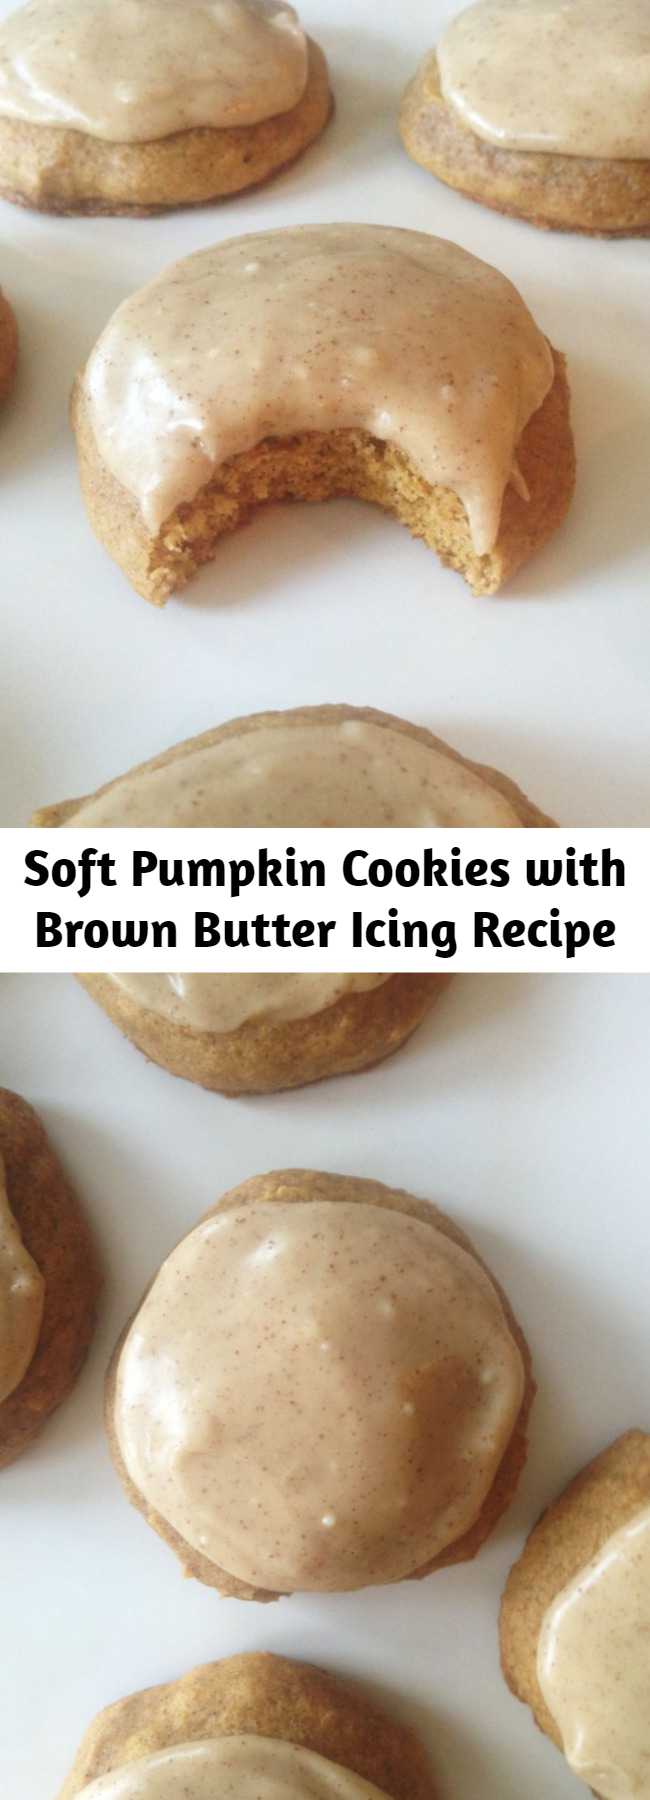 Soft Pumpkin Cookies with Brown Butter Icing Recipe - A soft and tender cake-like pumpkin cookie with pumpkin pie spices, slathered with an amazing brown butter frosting! These Pumpkin Cookies with Brown Butter Icing is the pumpkin recipe that started the whole pumpkin obsession for me, and they do not disappoint!